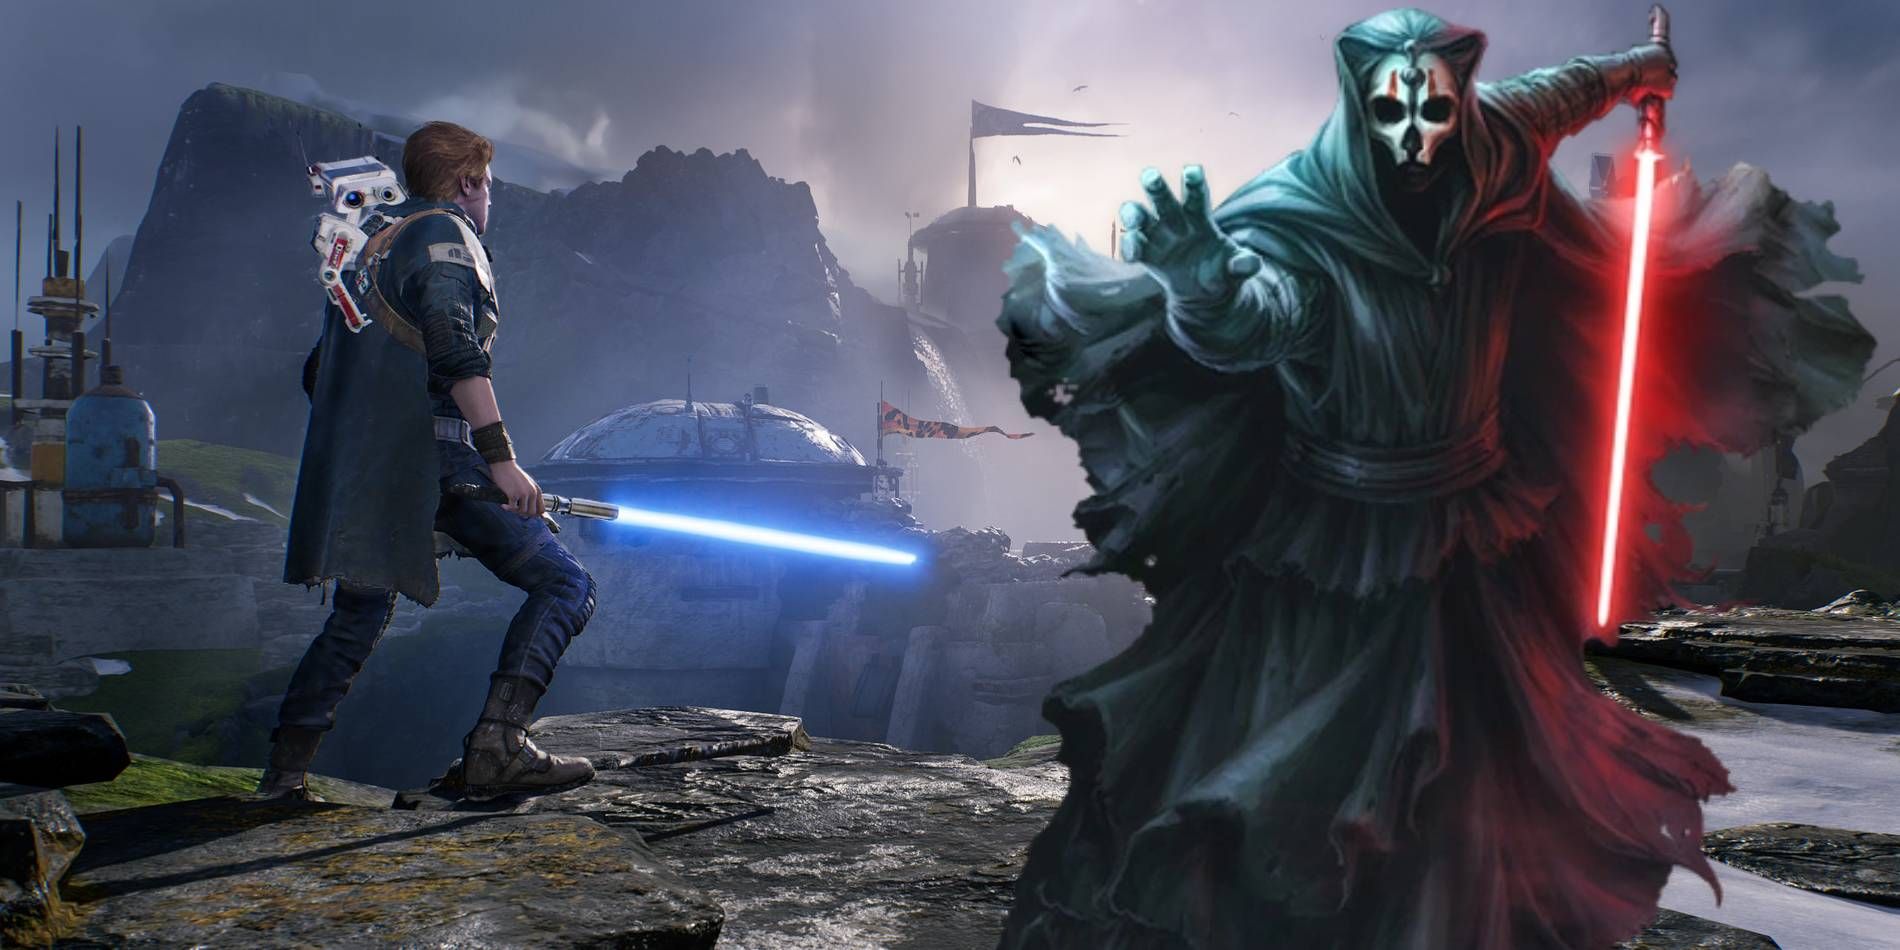 Star Wars Jedi: Fallen Order Cal staring over planet with Darth Nihilus from Knights of the Old Republic 2